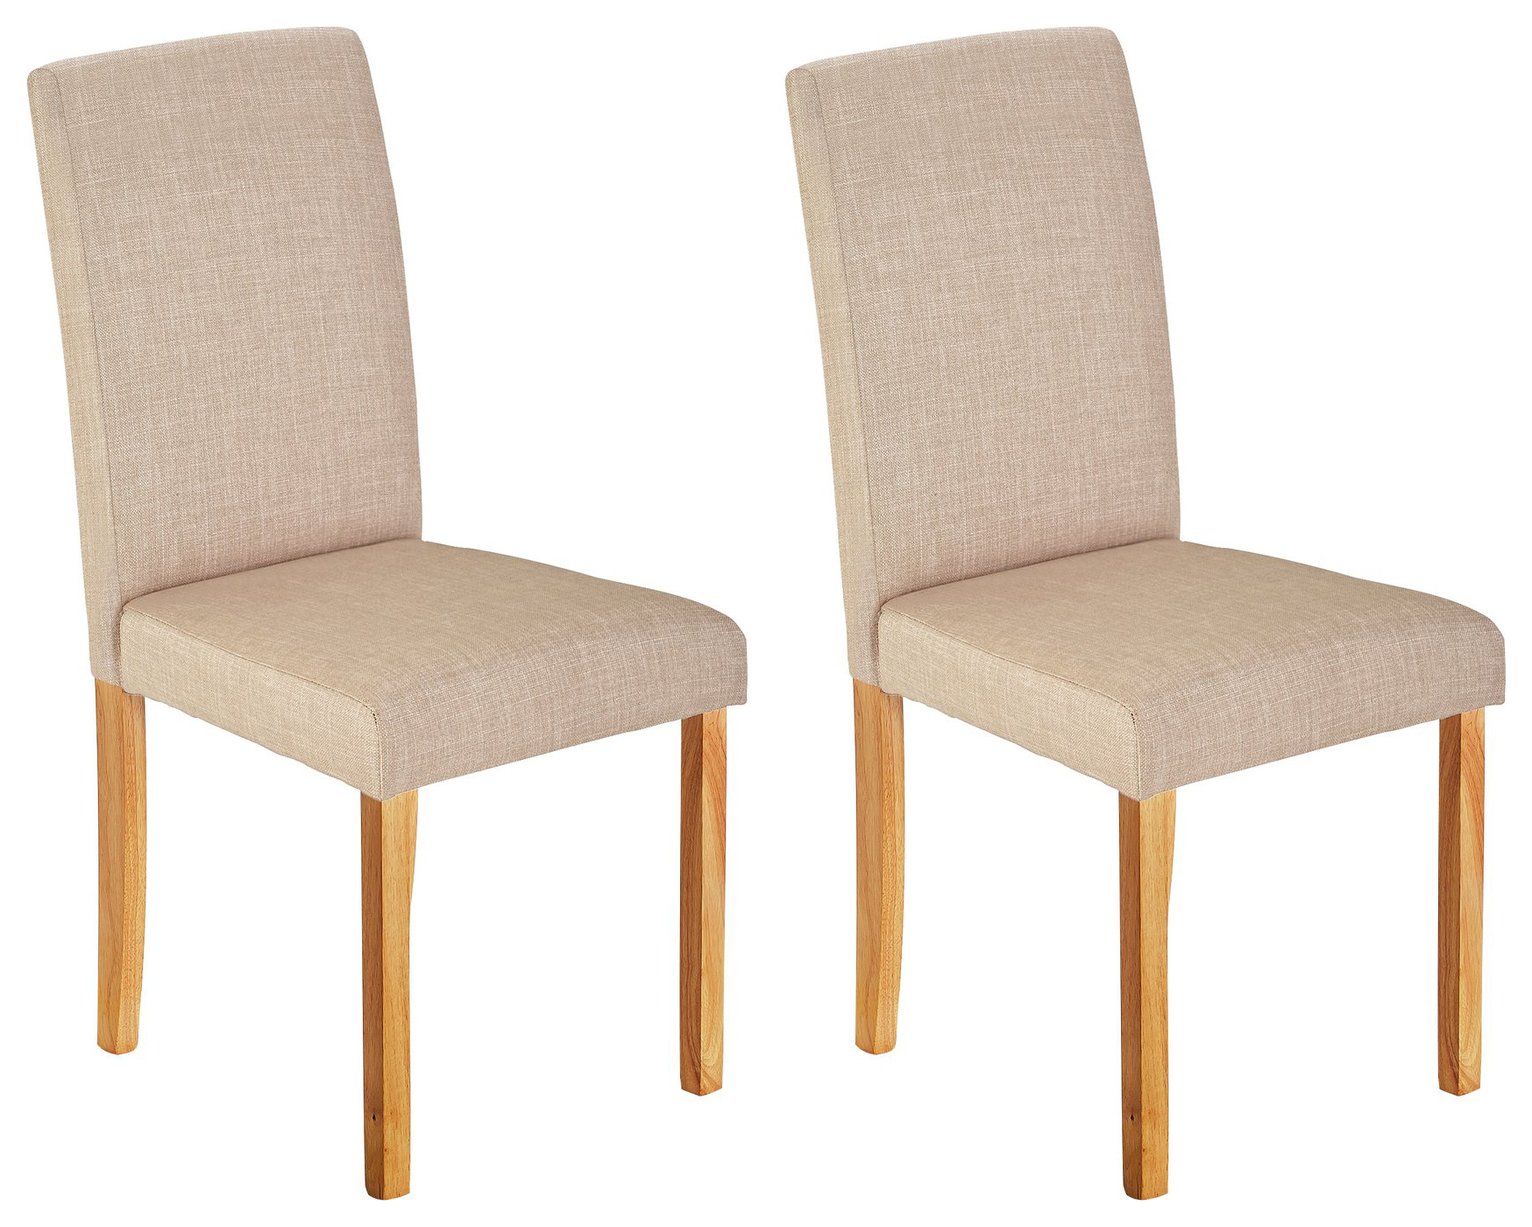 Argos Home Pair of Mid Back Fabric Chairs - Oatmeal